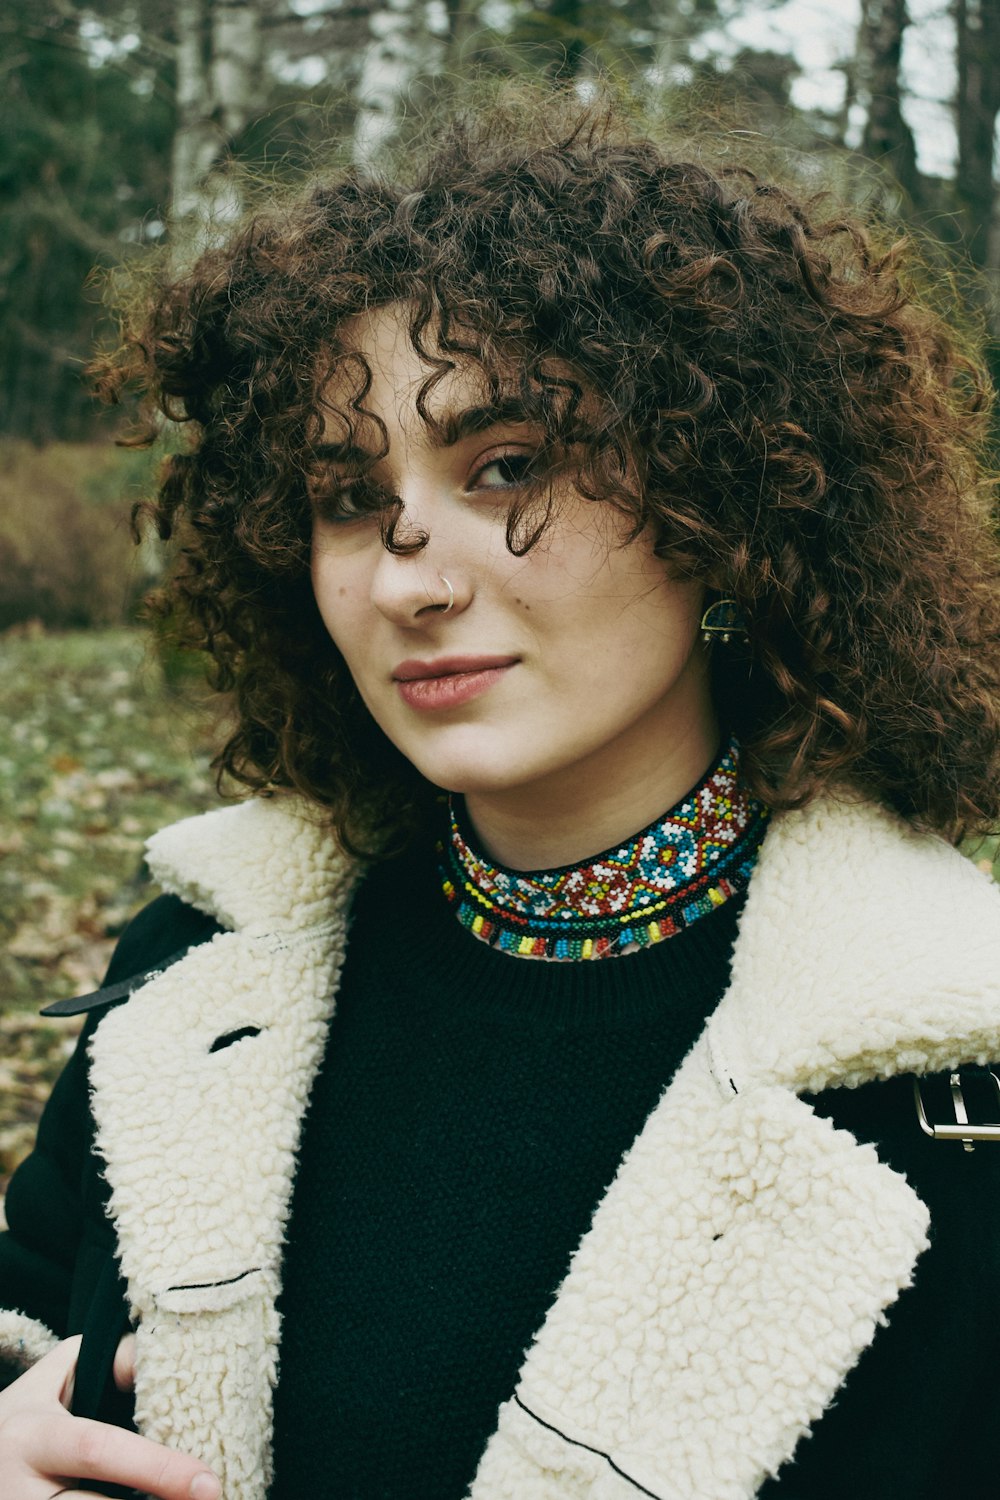 a woman with curly hair wearing a black sweater and a white jacket